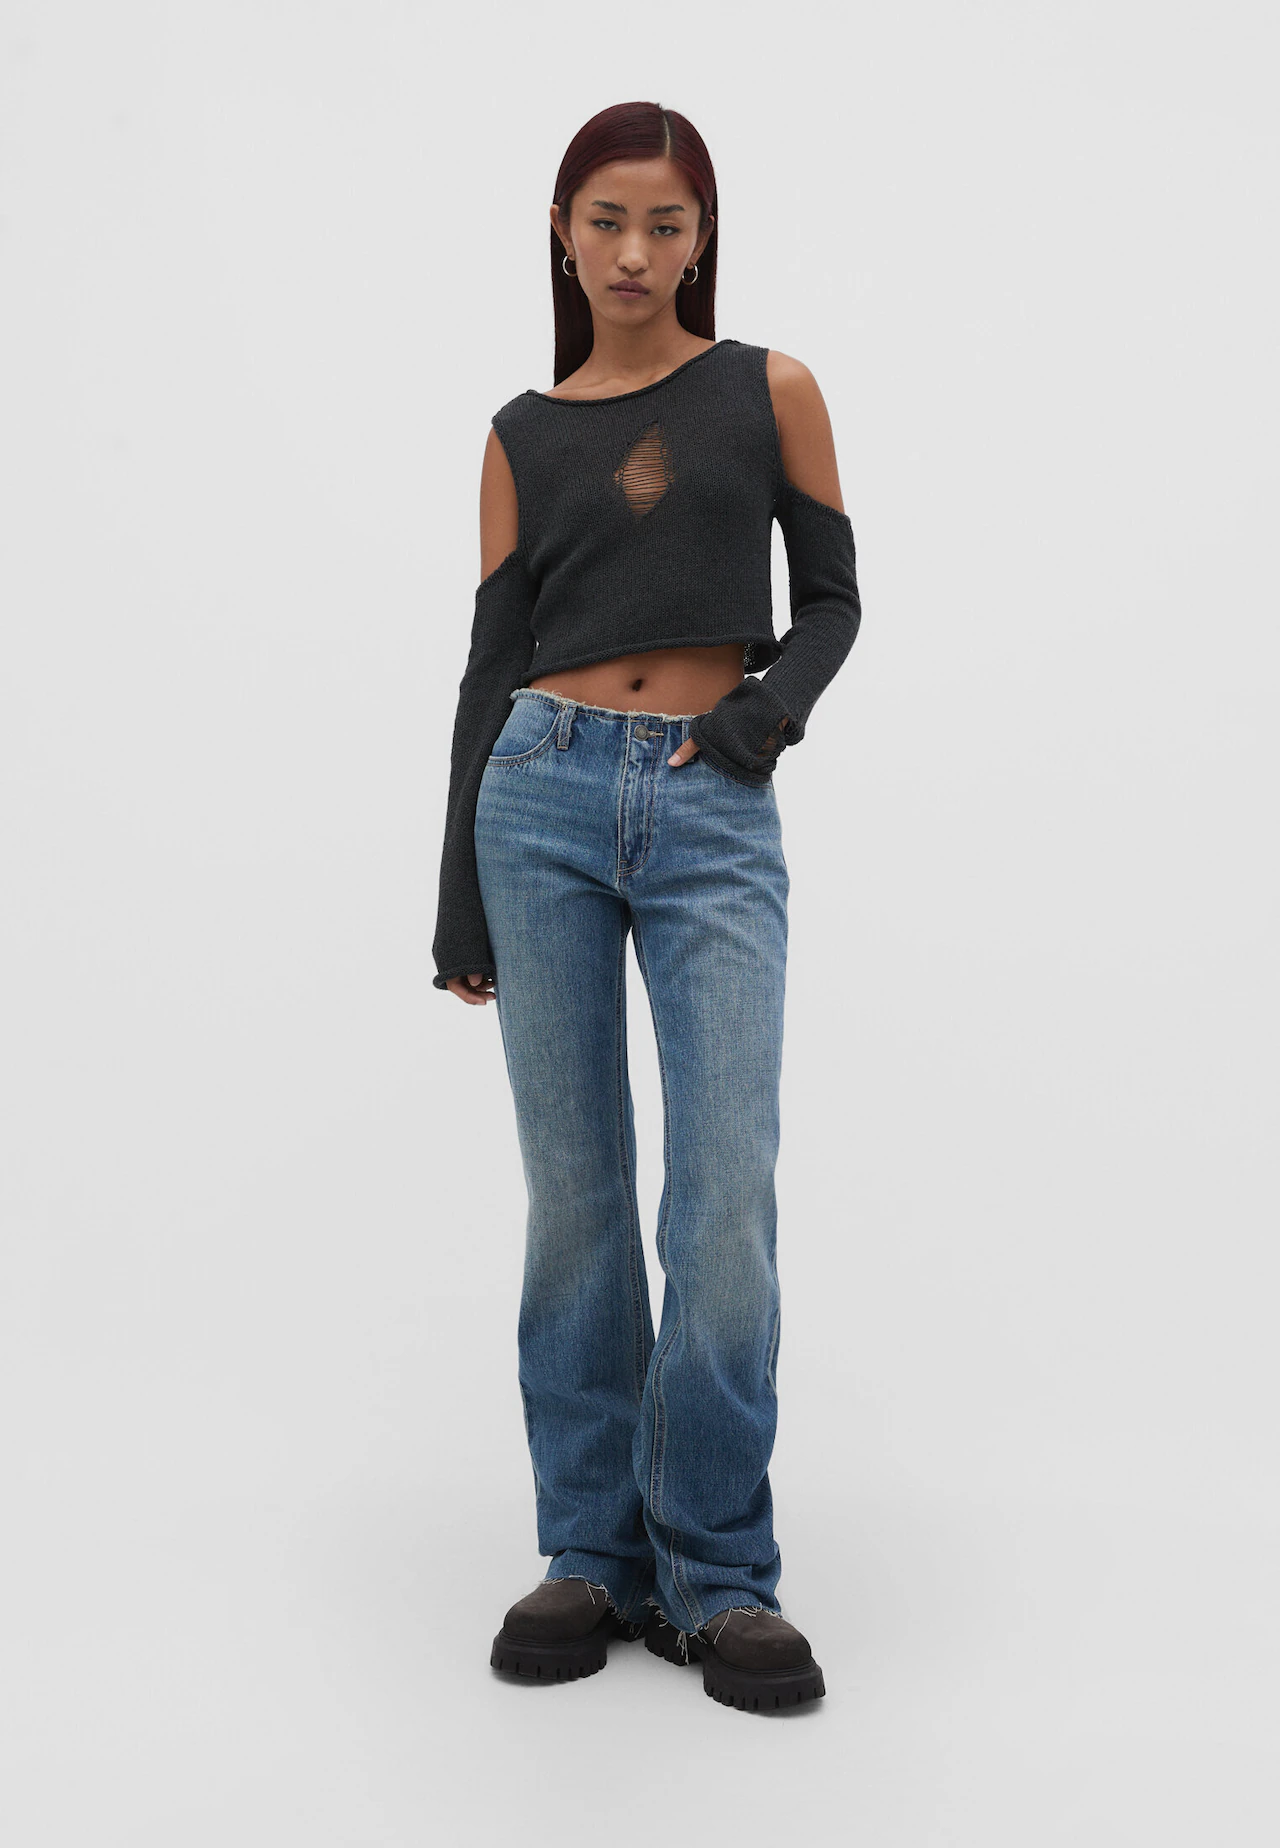 Low waist flared jeans